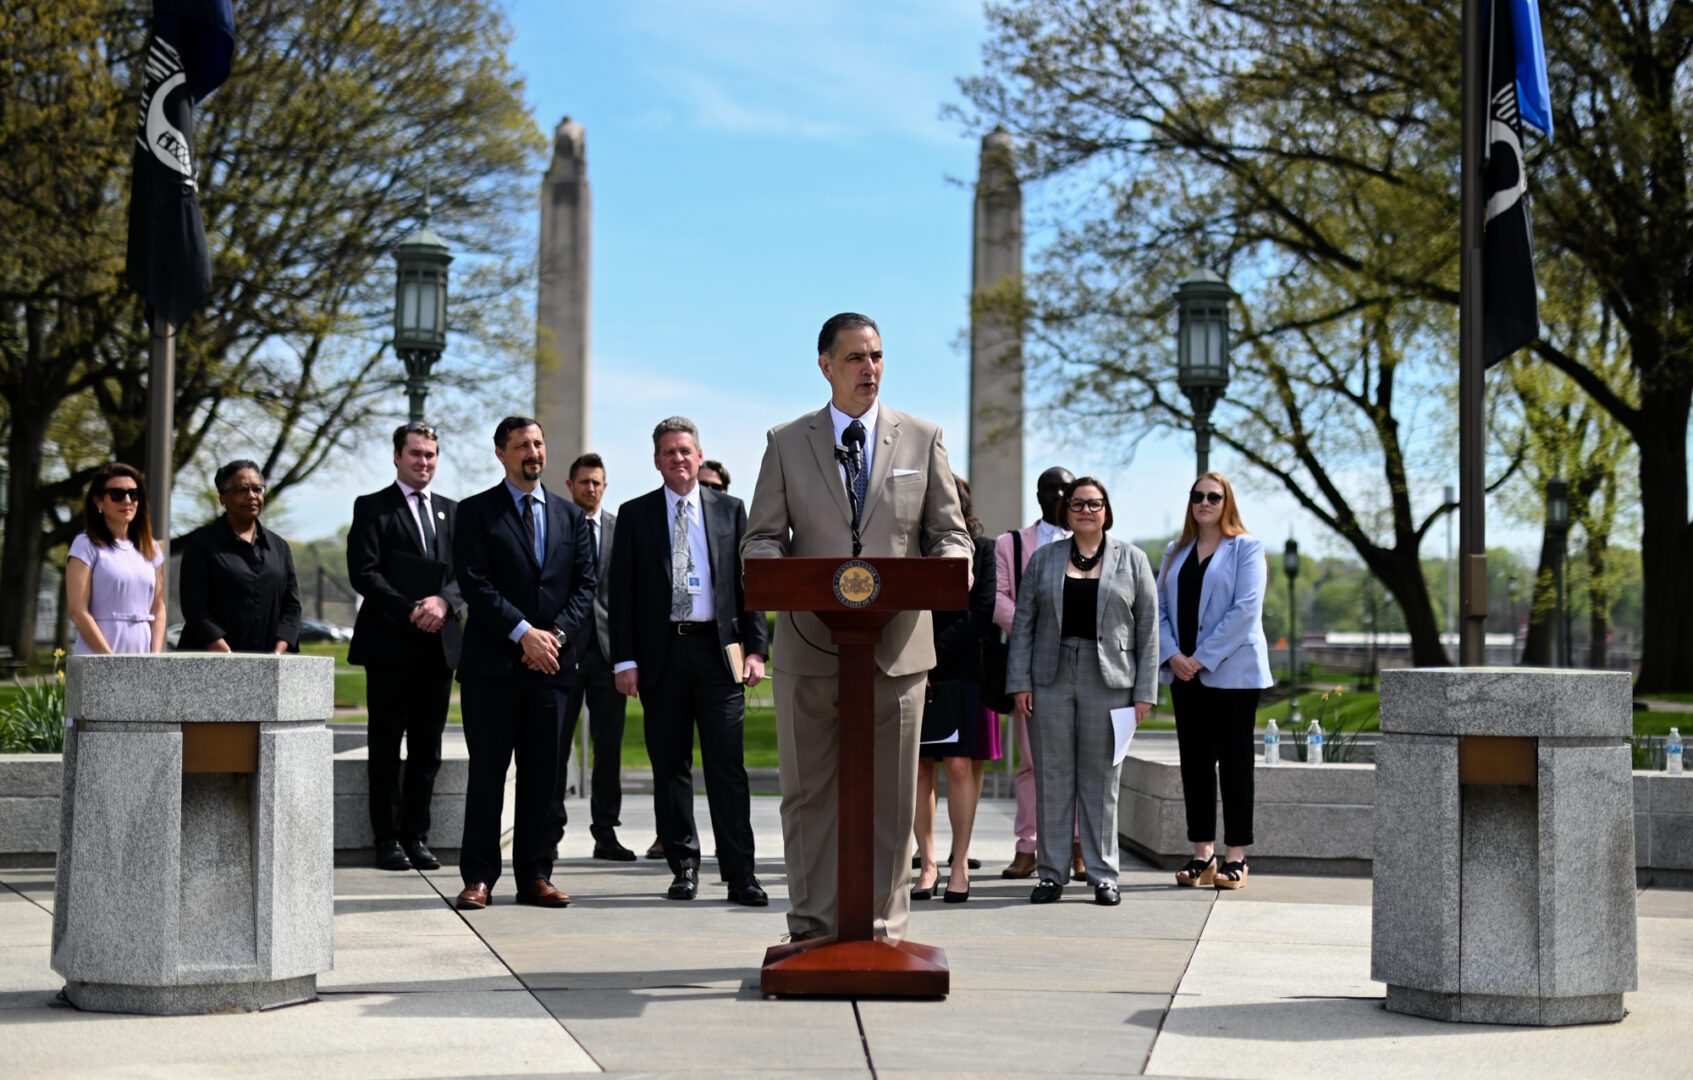 Pennsylvania Acting Department of Environmental Protection Secretary Rich Negrin announces a new EPA climate grant program at Soldier's & Sailor's Grove in Harrisburg on April 14, 2023 (Jeremy Long - WITF)